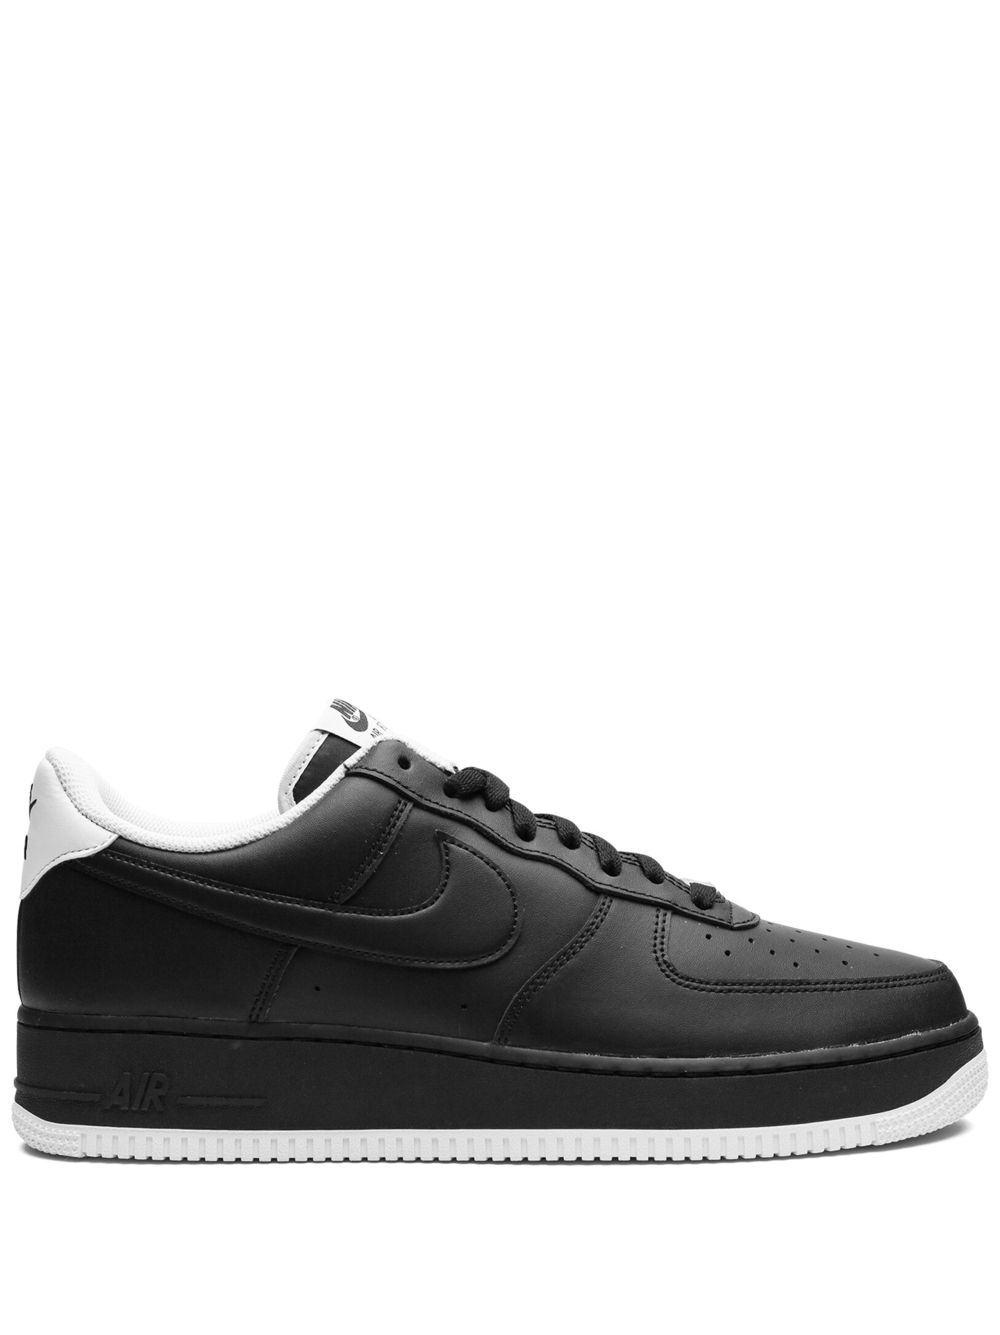 Nike Air Force 1 ‘07 "black/white Sole" Sneakers